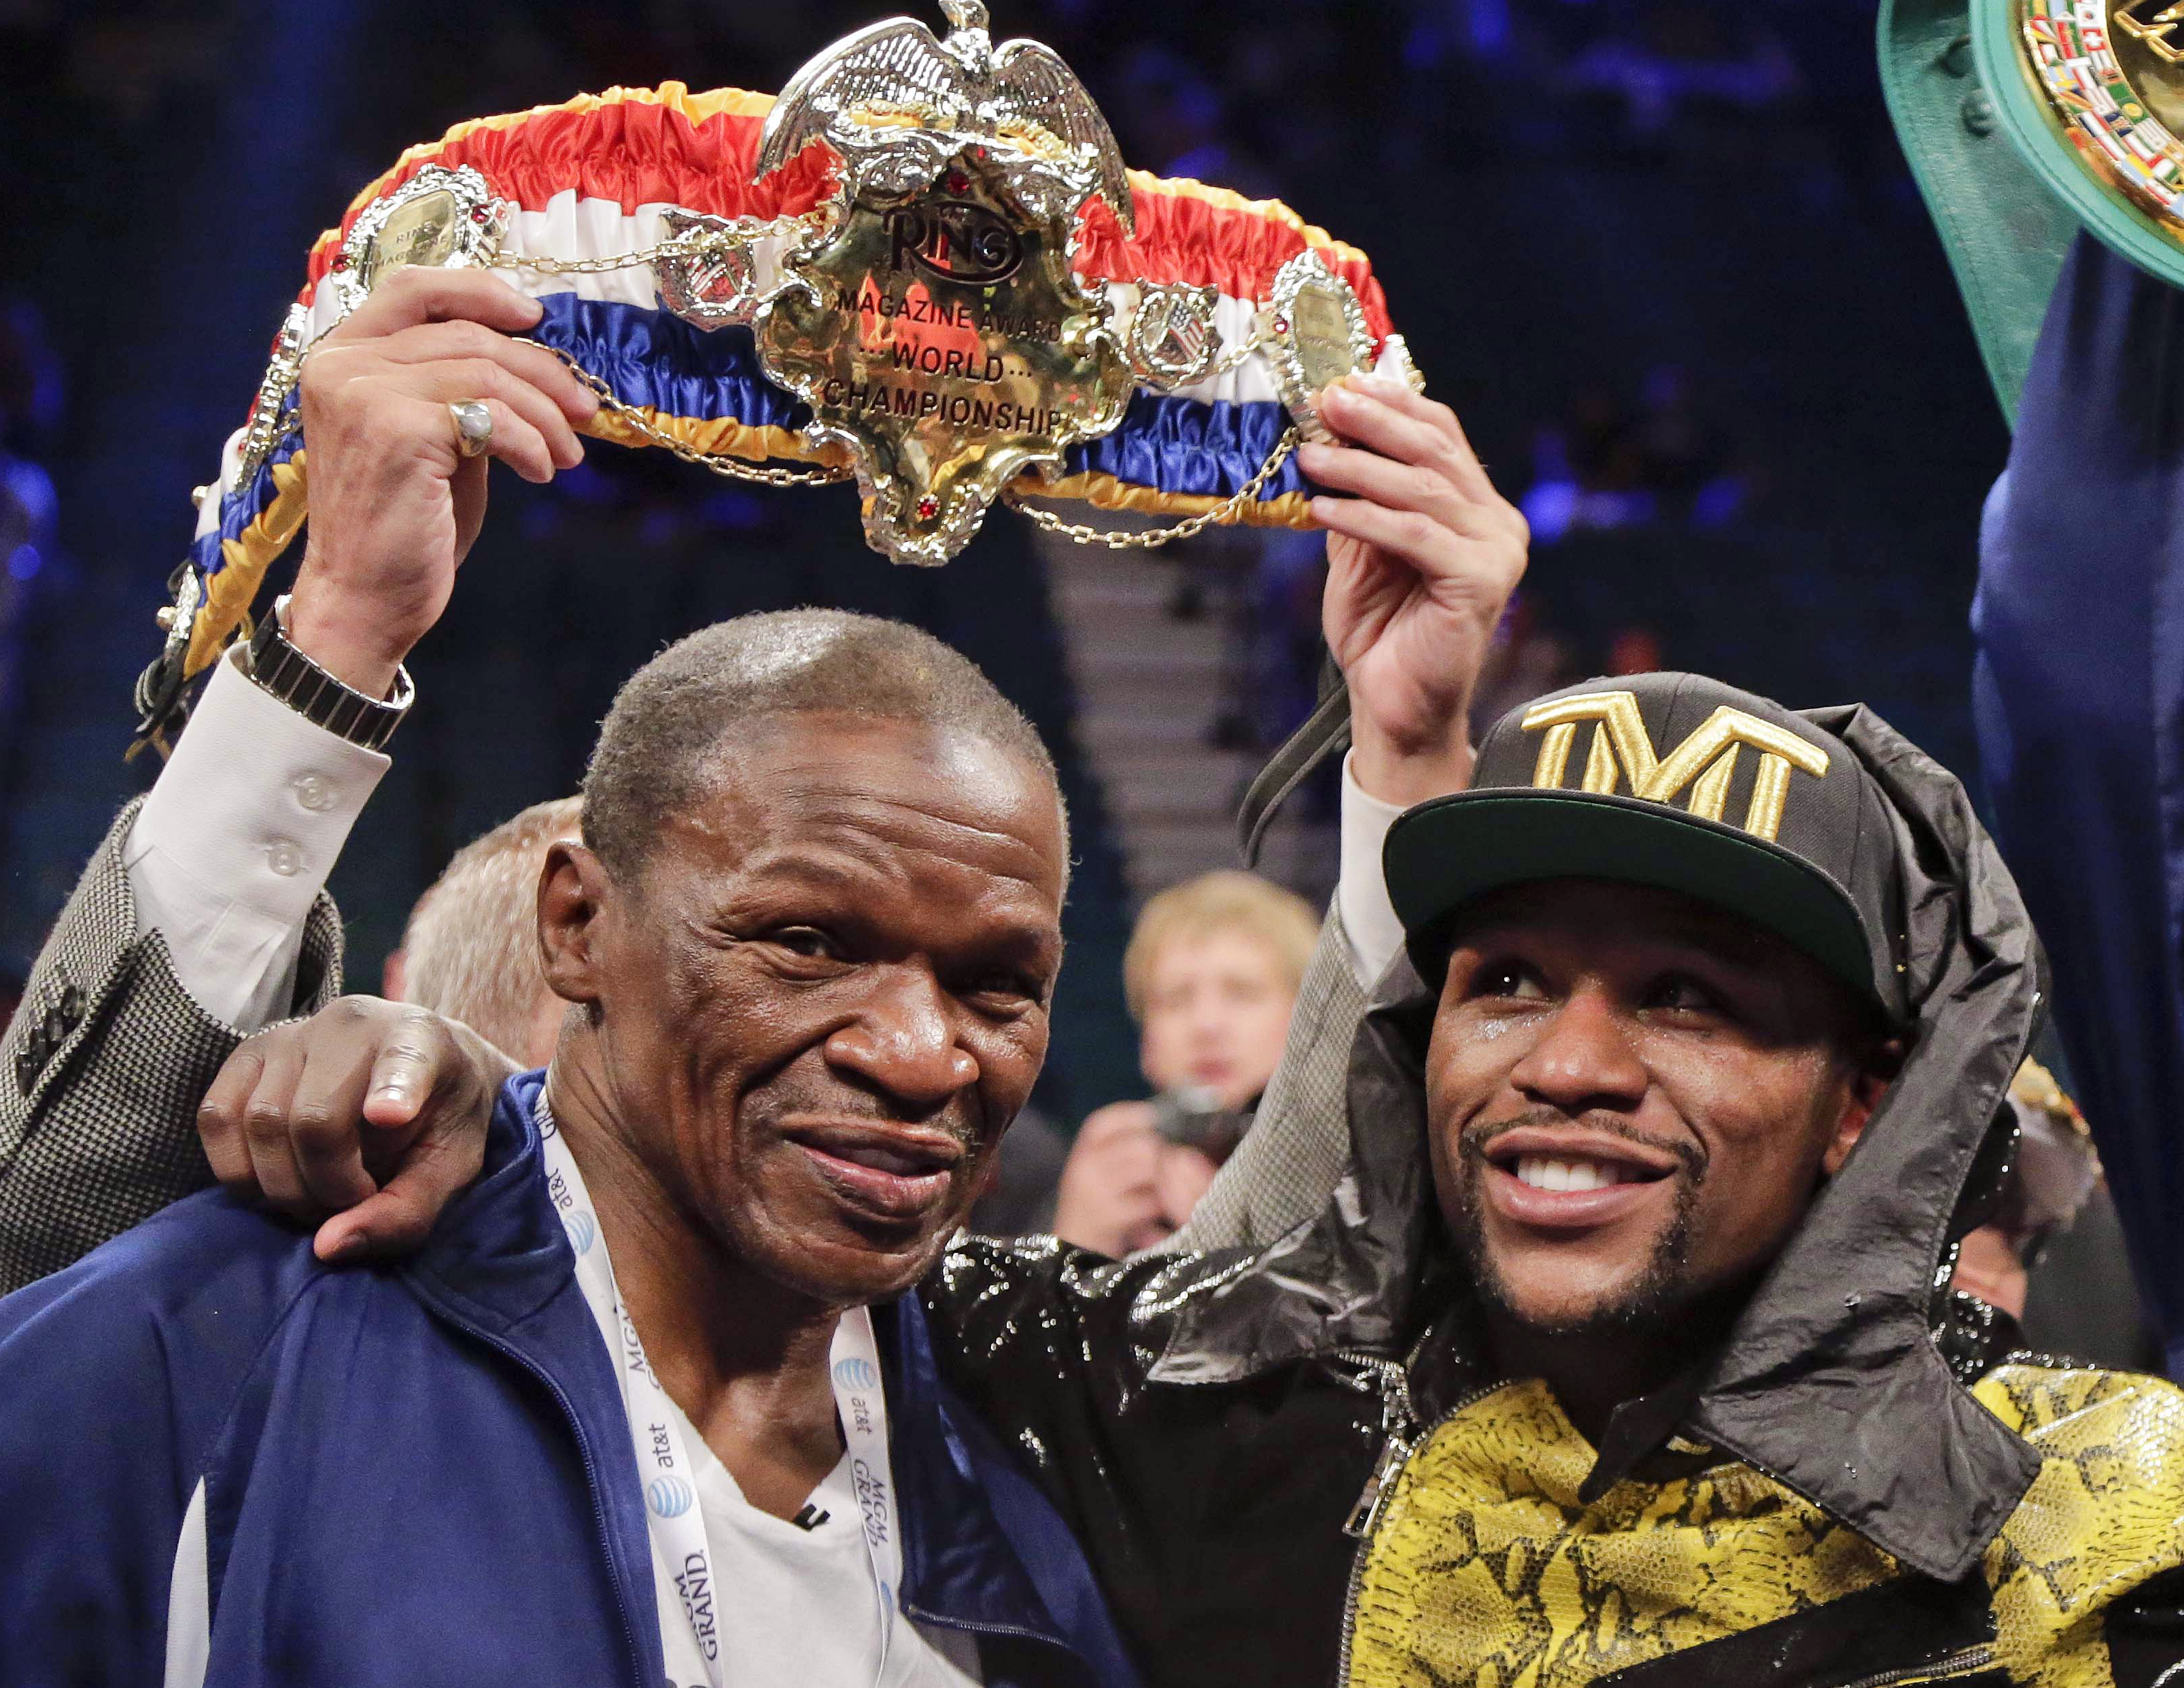 FILE - In this May 4, 2013, file photo, Floyd Mayweather Jr., right, poses for photos with his father, Floyd Mayeather Sr. after defeating Robert Guerrero by unanimous decision in a WBC welterweight title fight in Las Vegas. He taught his son to throw punches before he could walk, and he'll be in his corner for the biggest fight of his life against Manny Pacquiao on May 2. The relationship betwee Mayweather Sr. and his son, though, hasn't always been good. (AP Photo/Rick Bowmer, File)